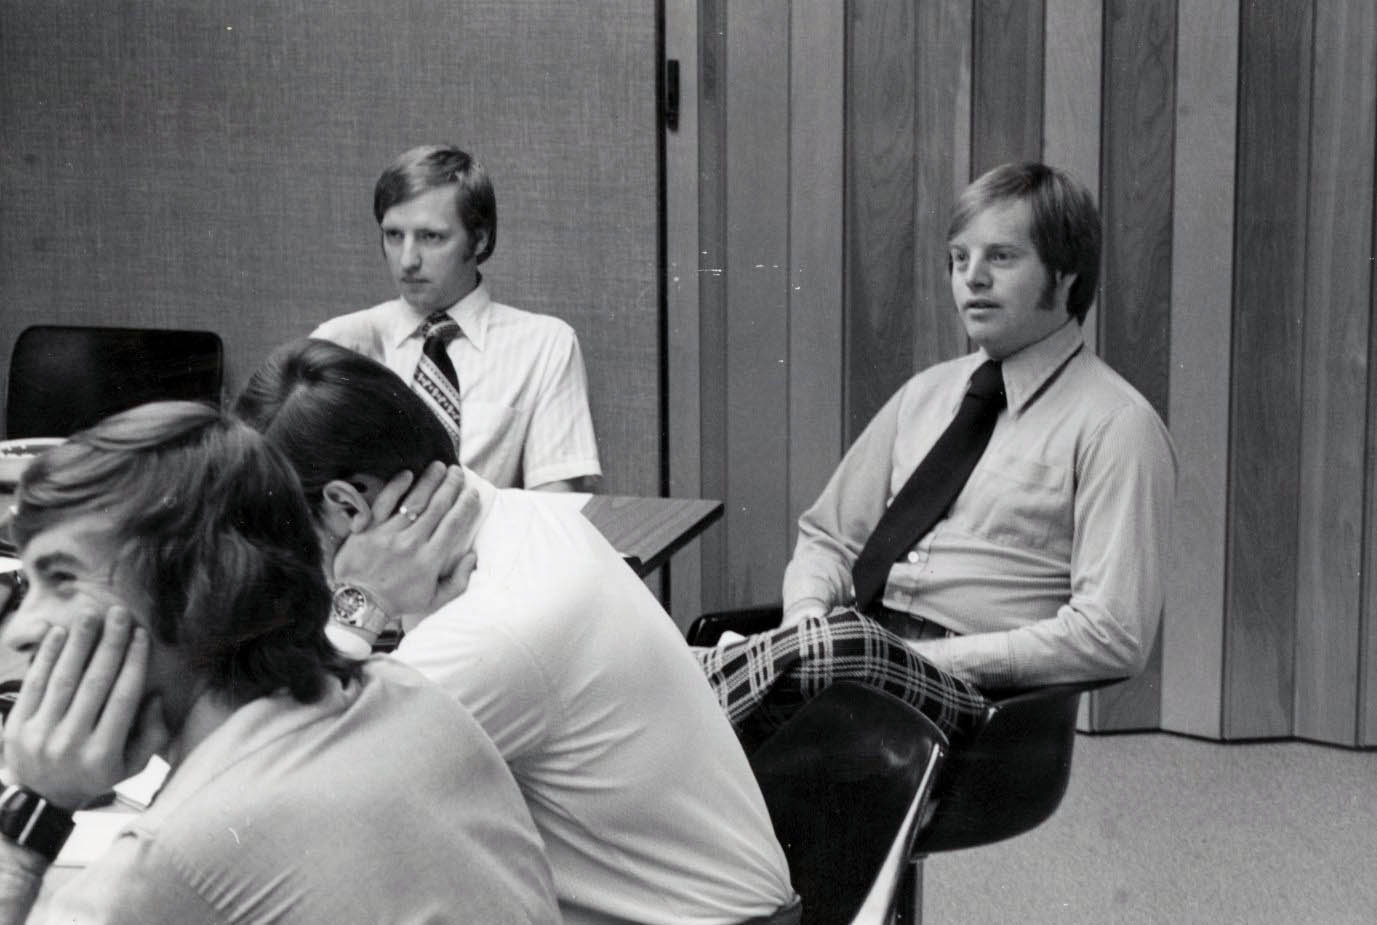 An archival photos from 1975 showing Kurt Polsley seated just right of center.